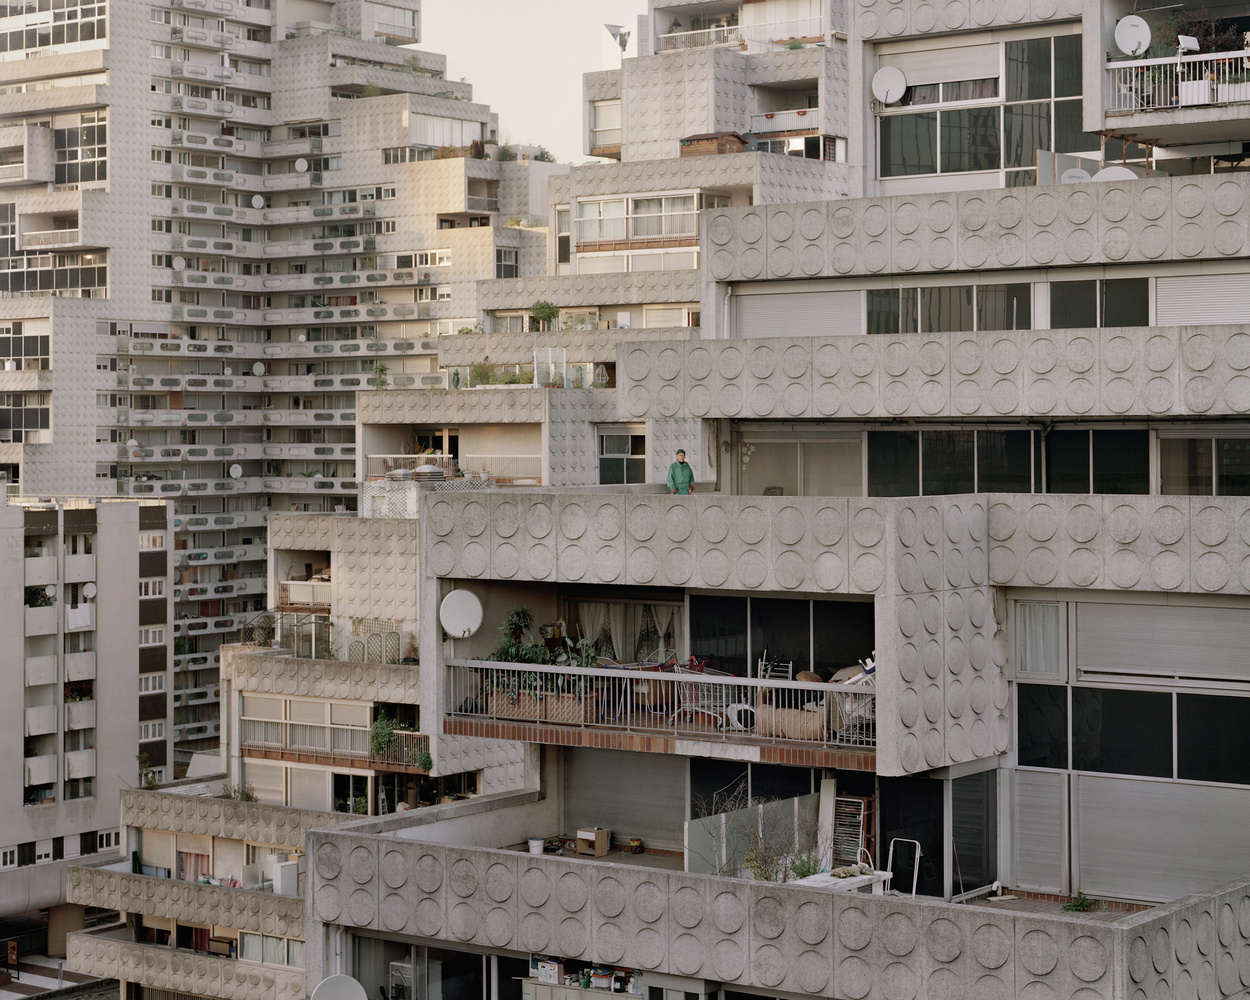 Postmodernism came into play in the late seventies in early eighties, built in direct opposition to the whitewashed style of Parisian decades passed. - This Real Life ‘Hunger Games’ City Was A Social Experiment That Almost Worked.